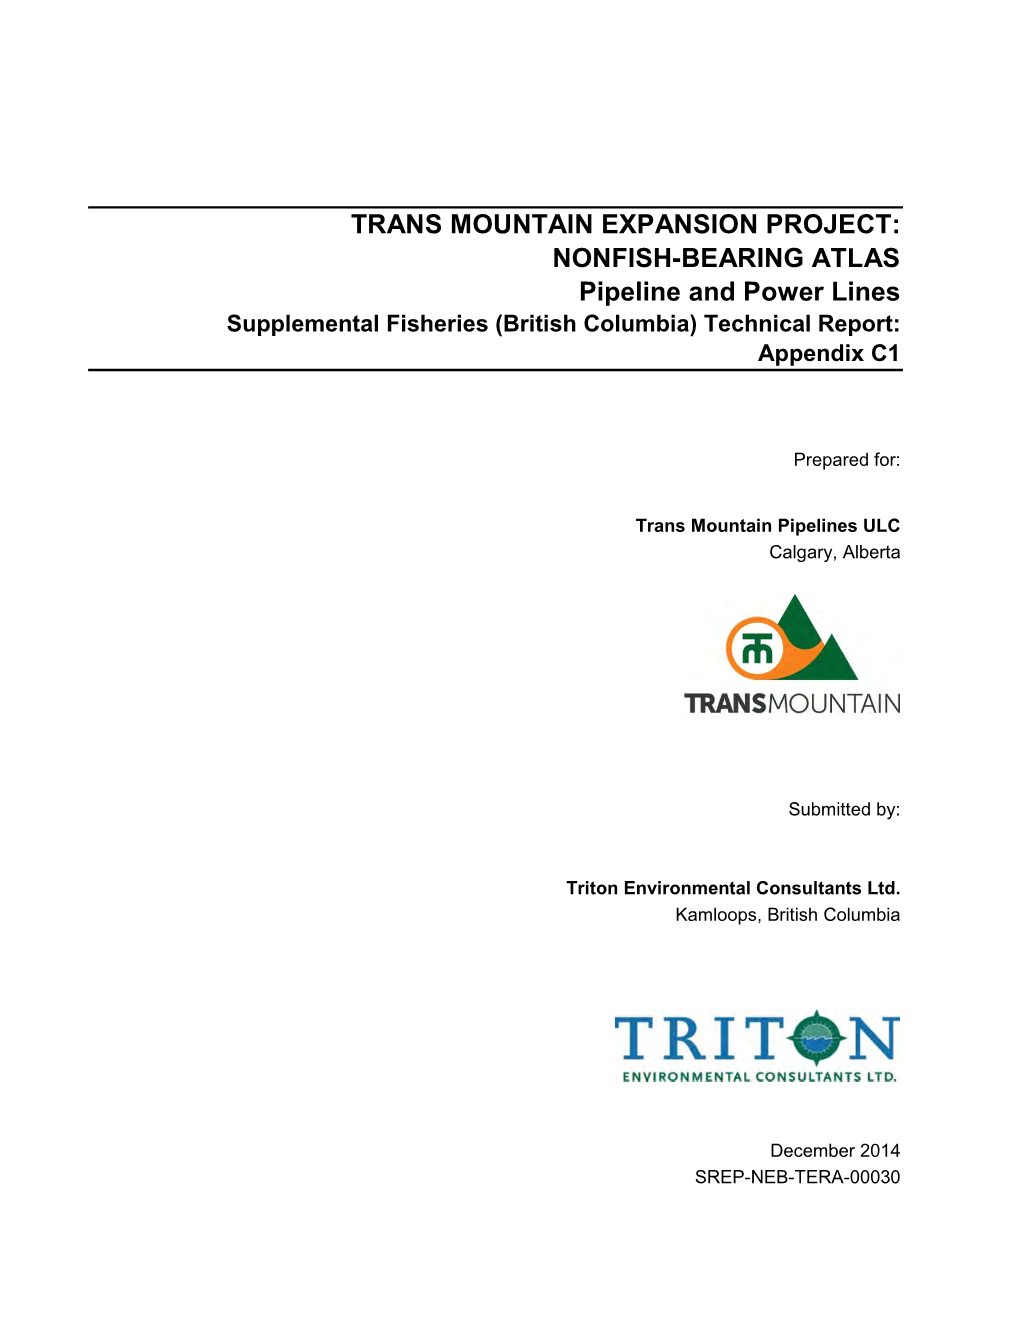 TRANS MOUNTAIN EXPANSION PROJECT: NONFISH-BEARING ATLAS Pipeline and Power Lines Supplemental Fisheries (British Columbia) Technical Report: Appendix C1